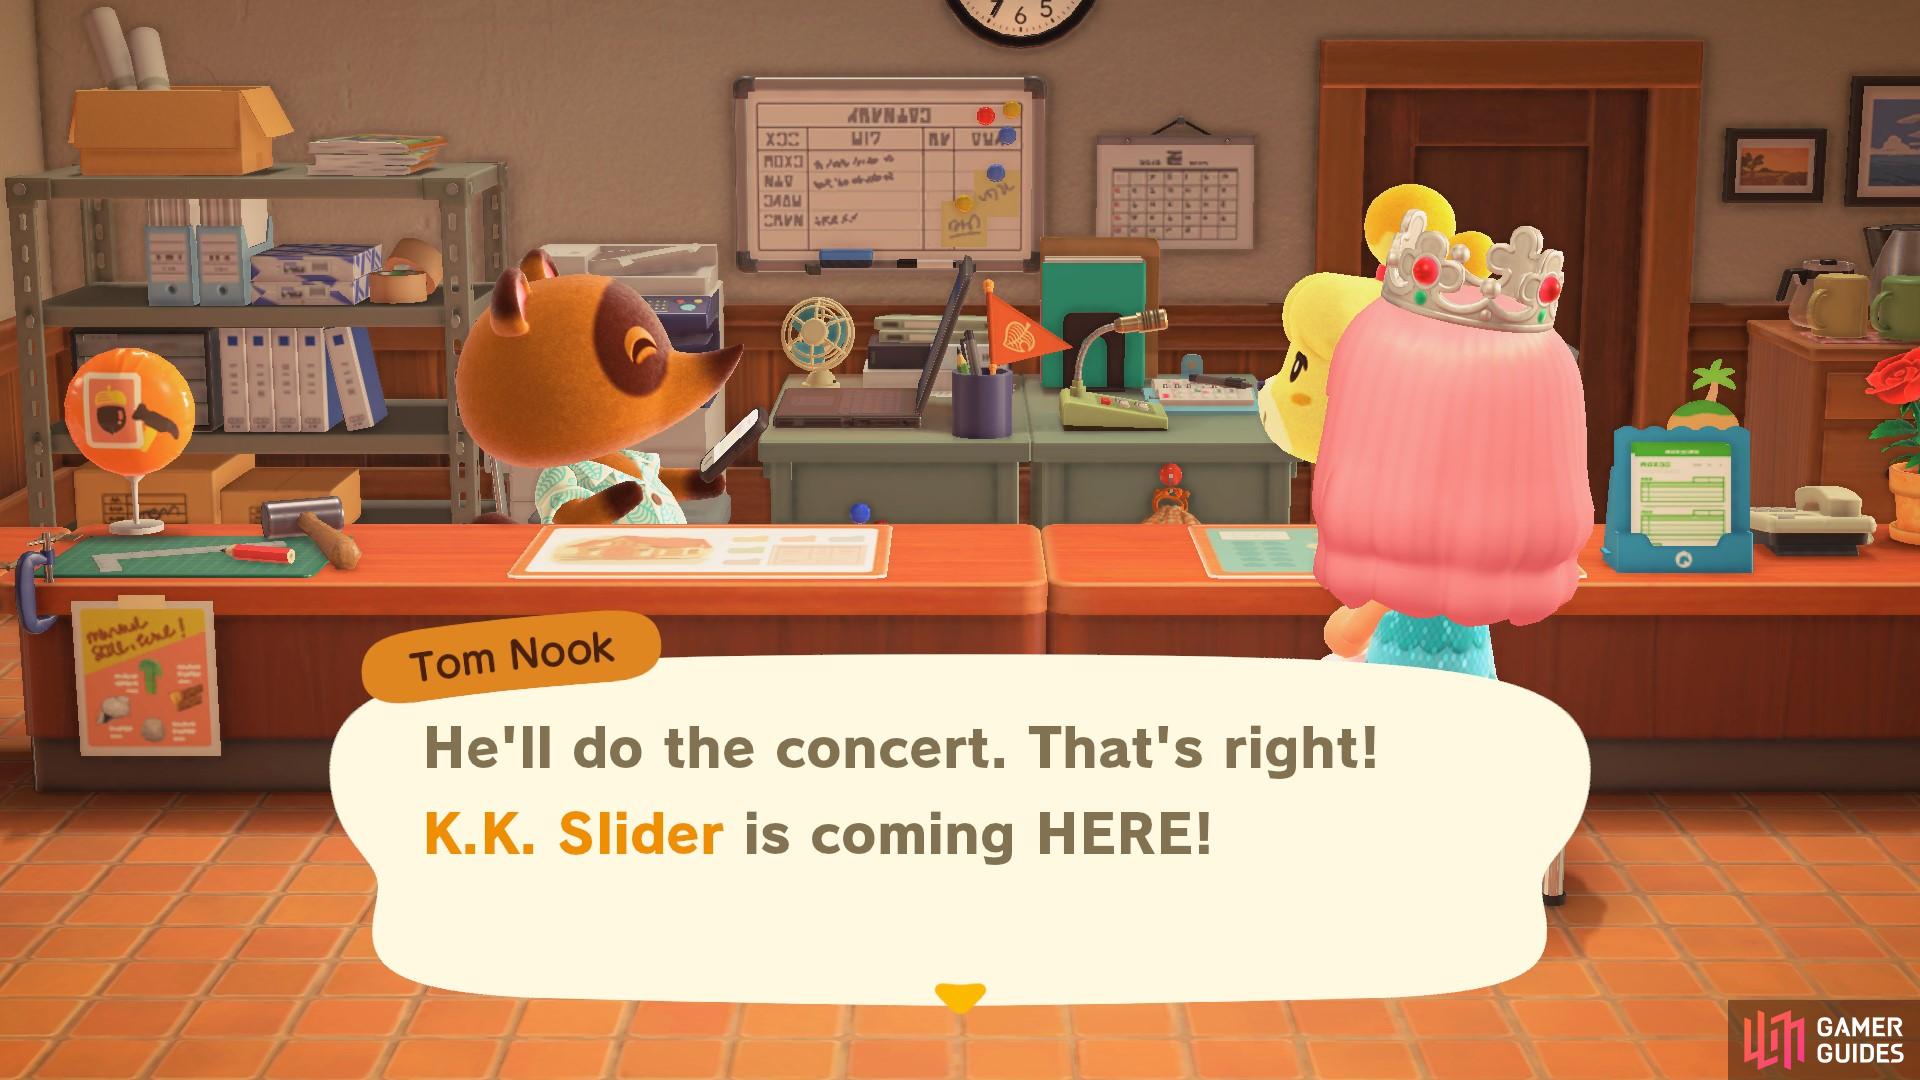 K.K. has agreed to play a concert for your island!